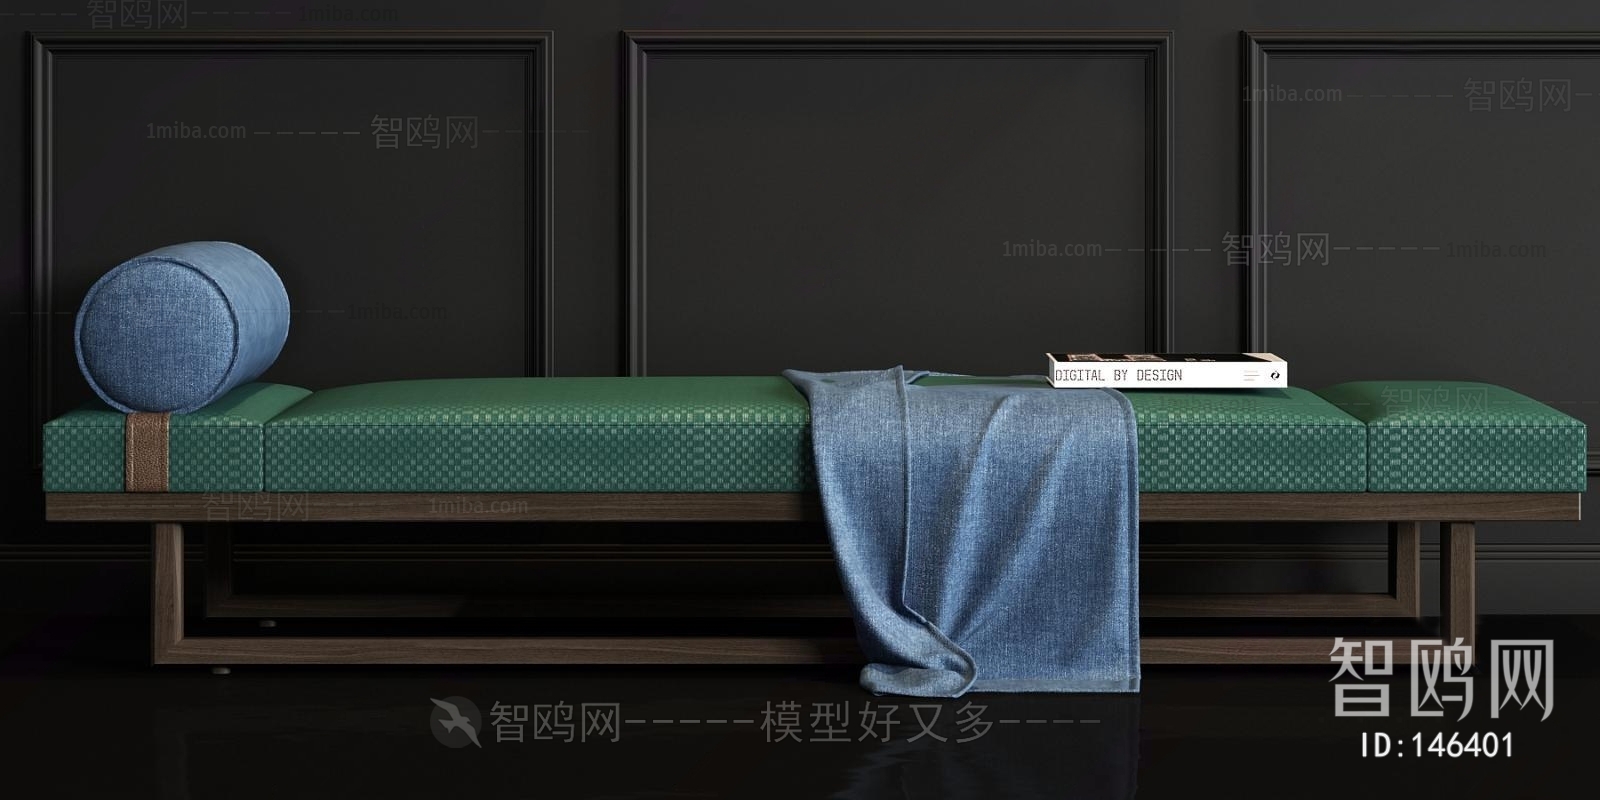 Modern New Chinese Style Bench